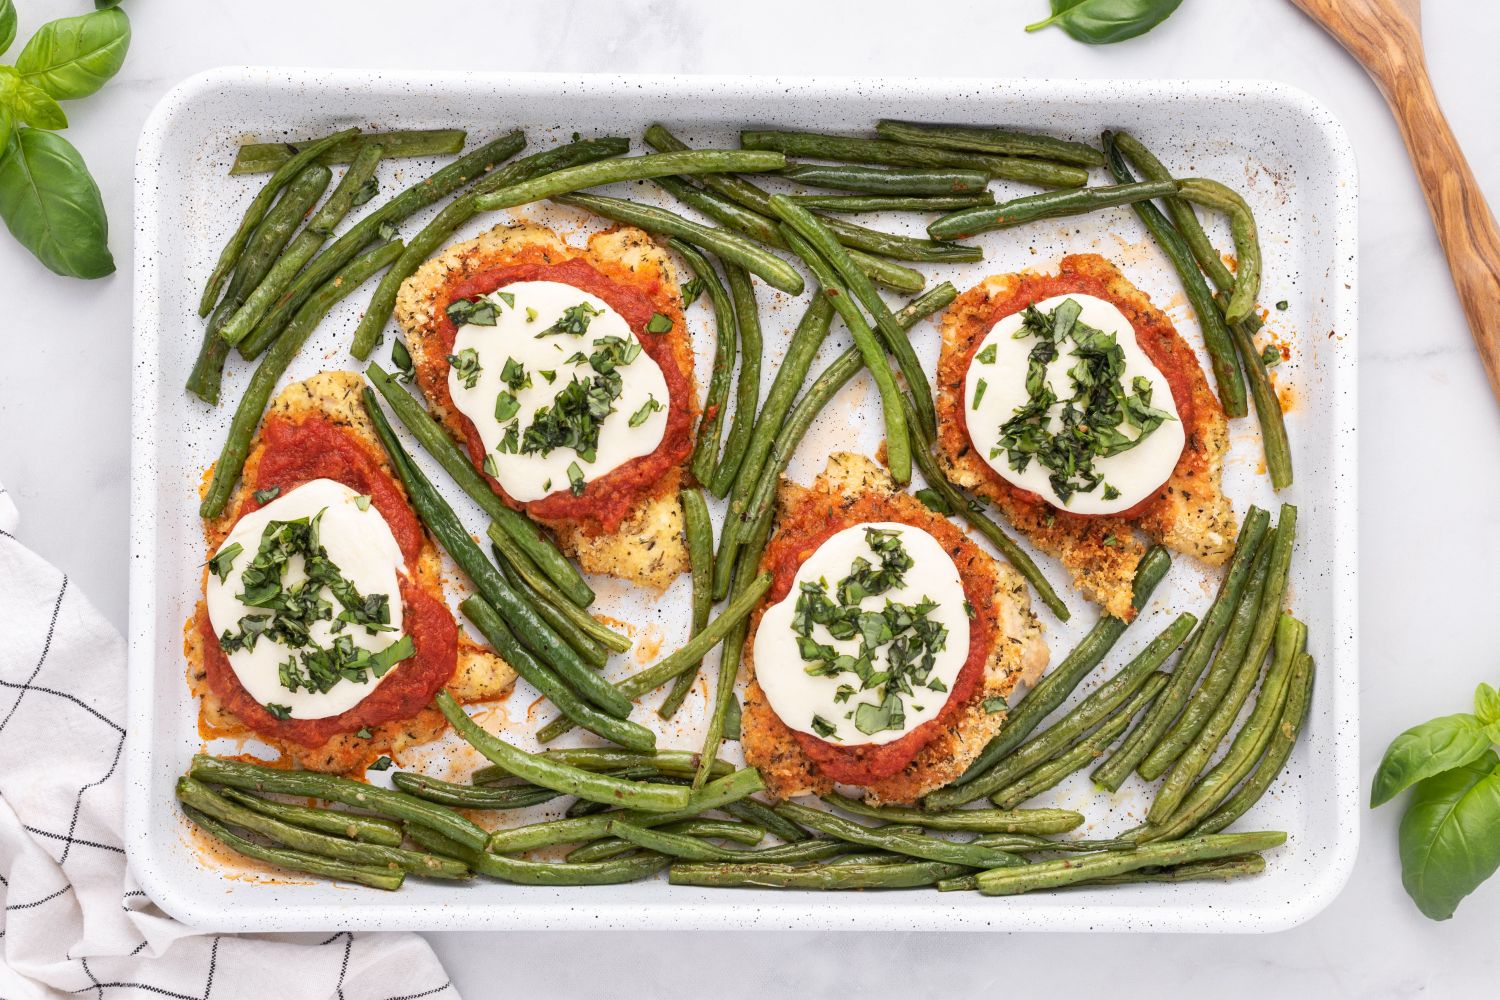 Healthy Chicken Parmesan with breaded chicken covered in sauce and cheese on a sheet pan with roasted green beans.